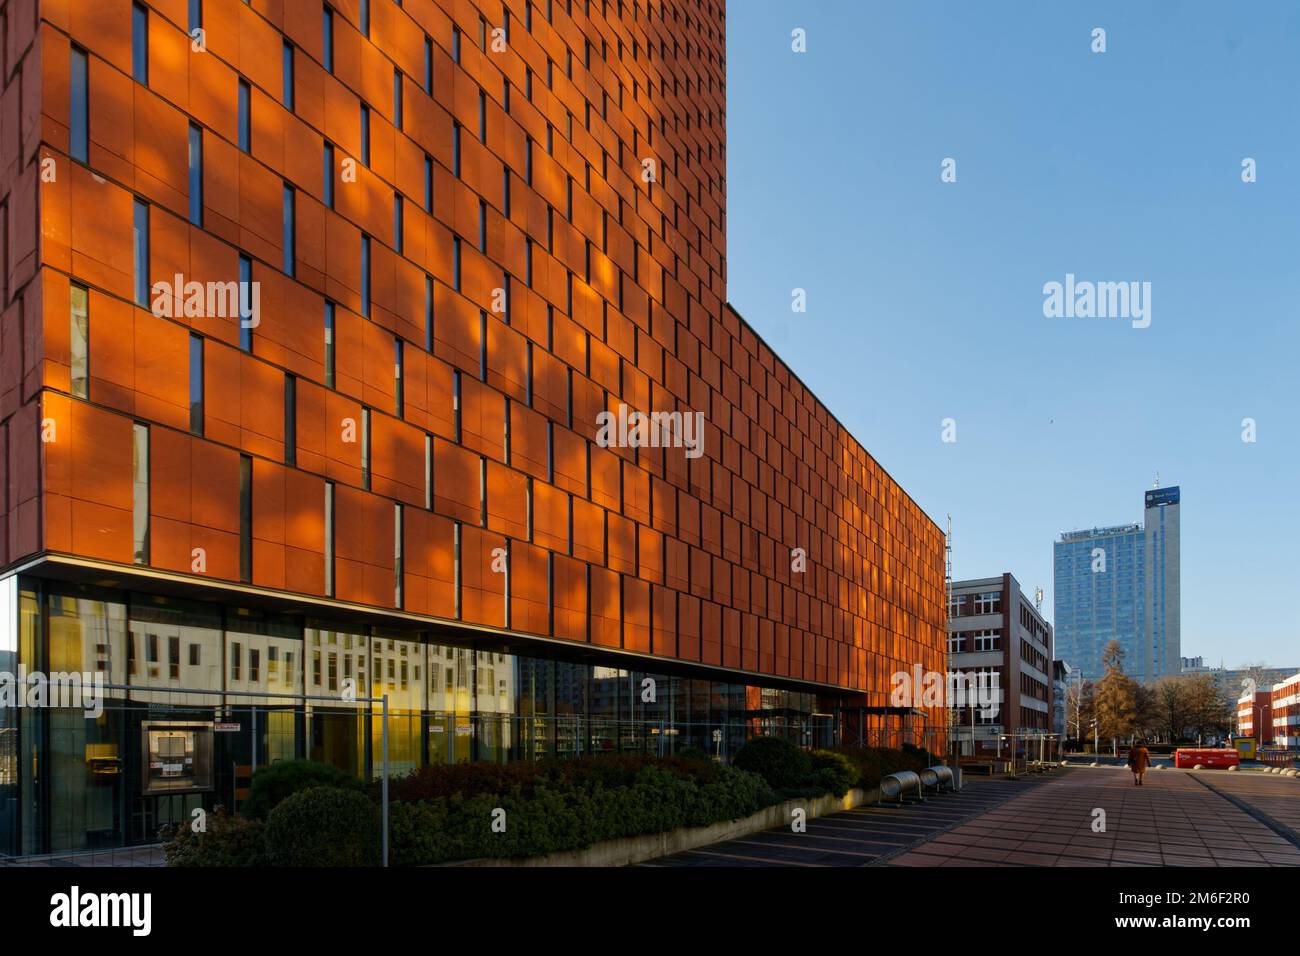 Academic and scientific library ('a.k.a. 'the redhead'). One of the many award-winning examples of modern architecture in downtown Katowice. Stock Photo